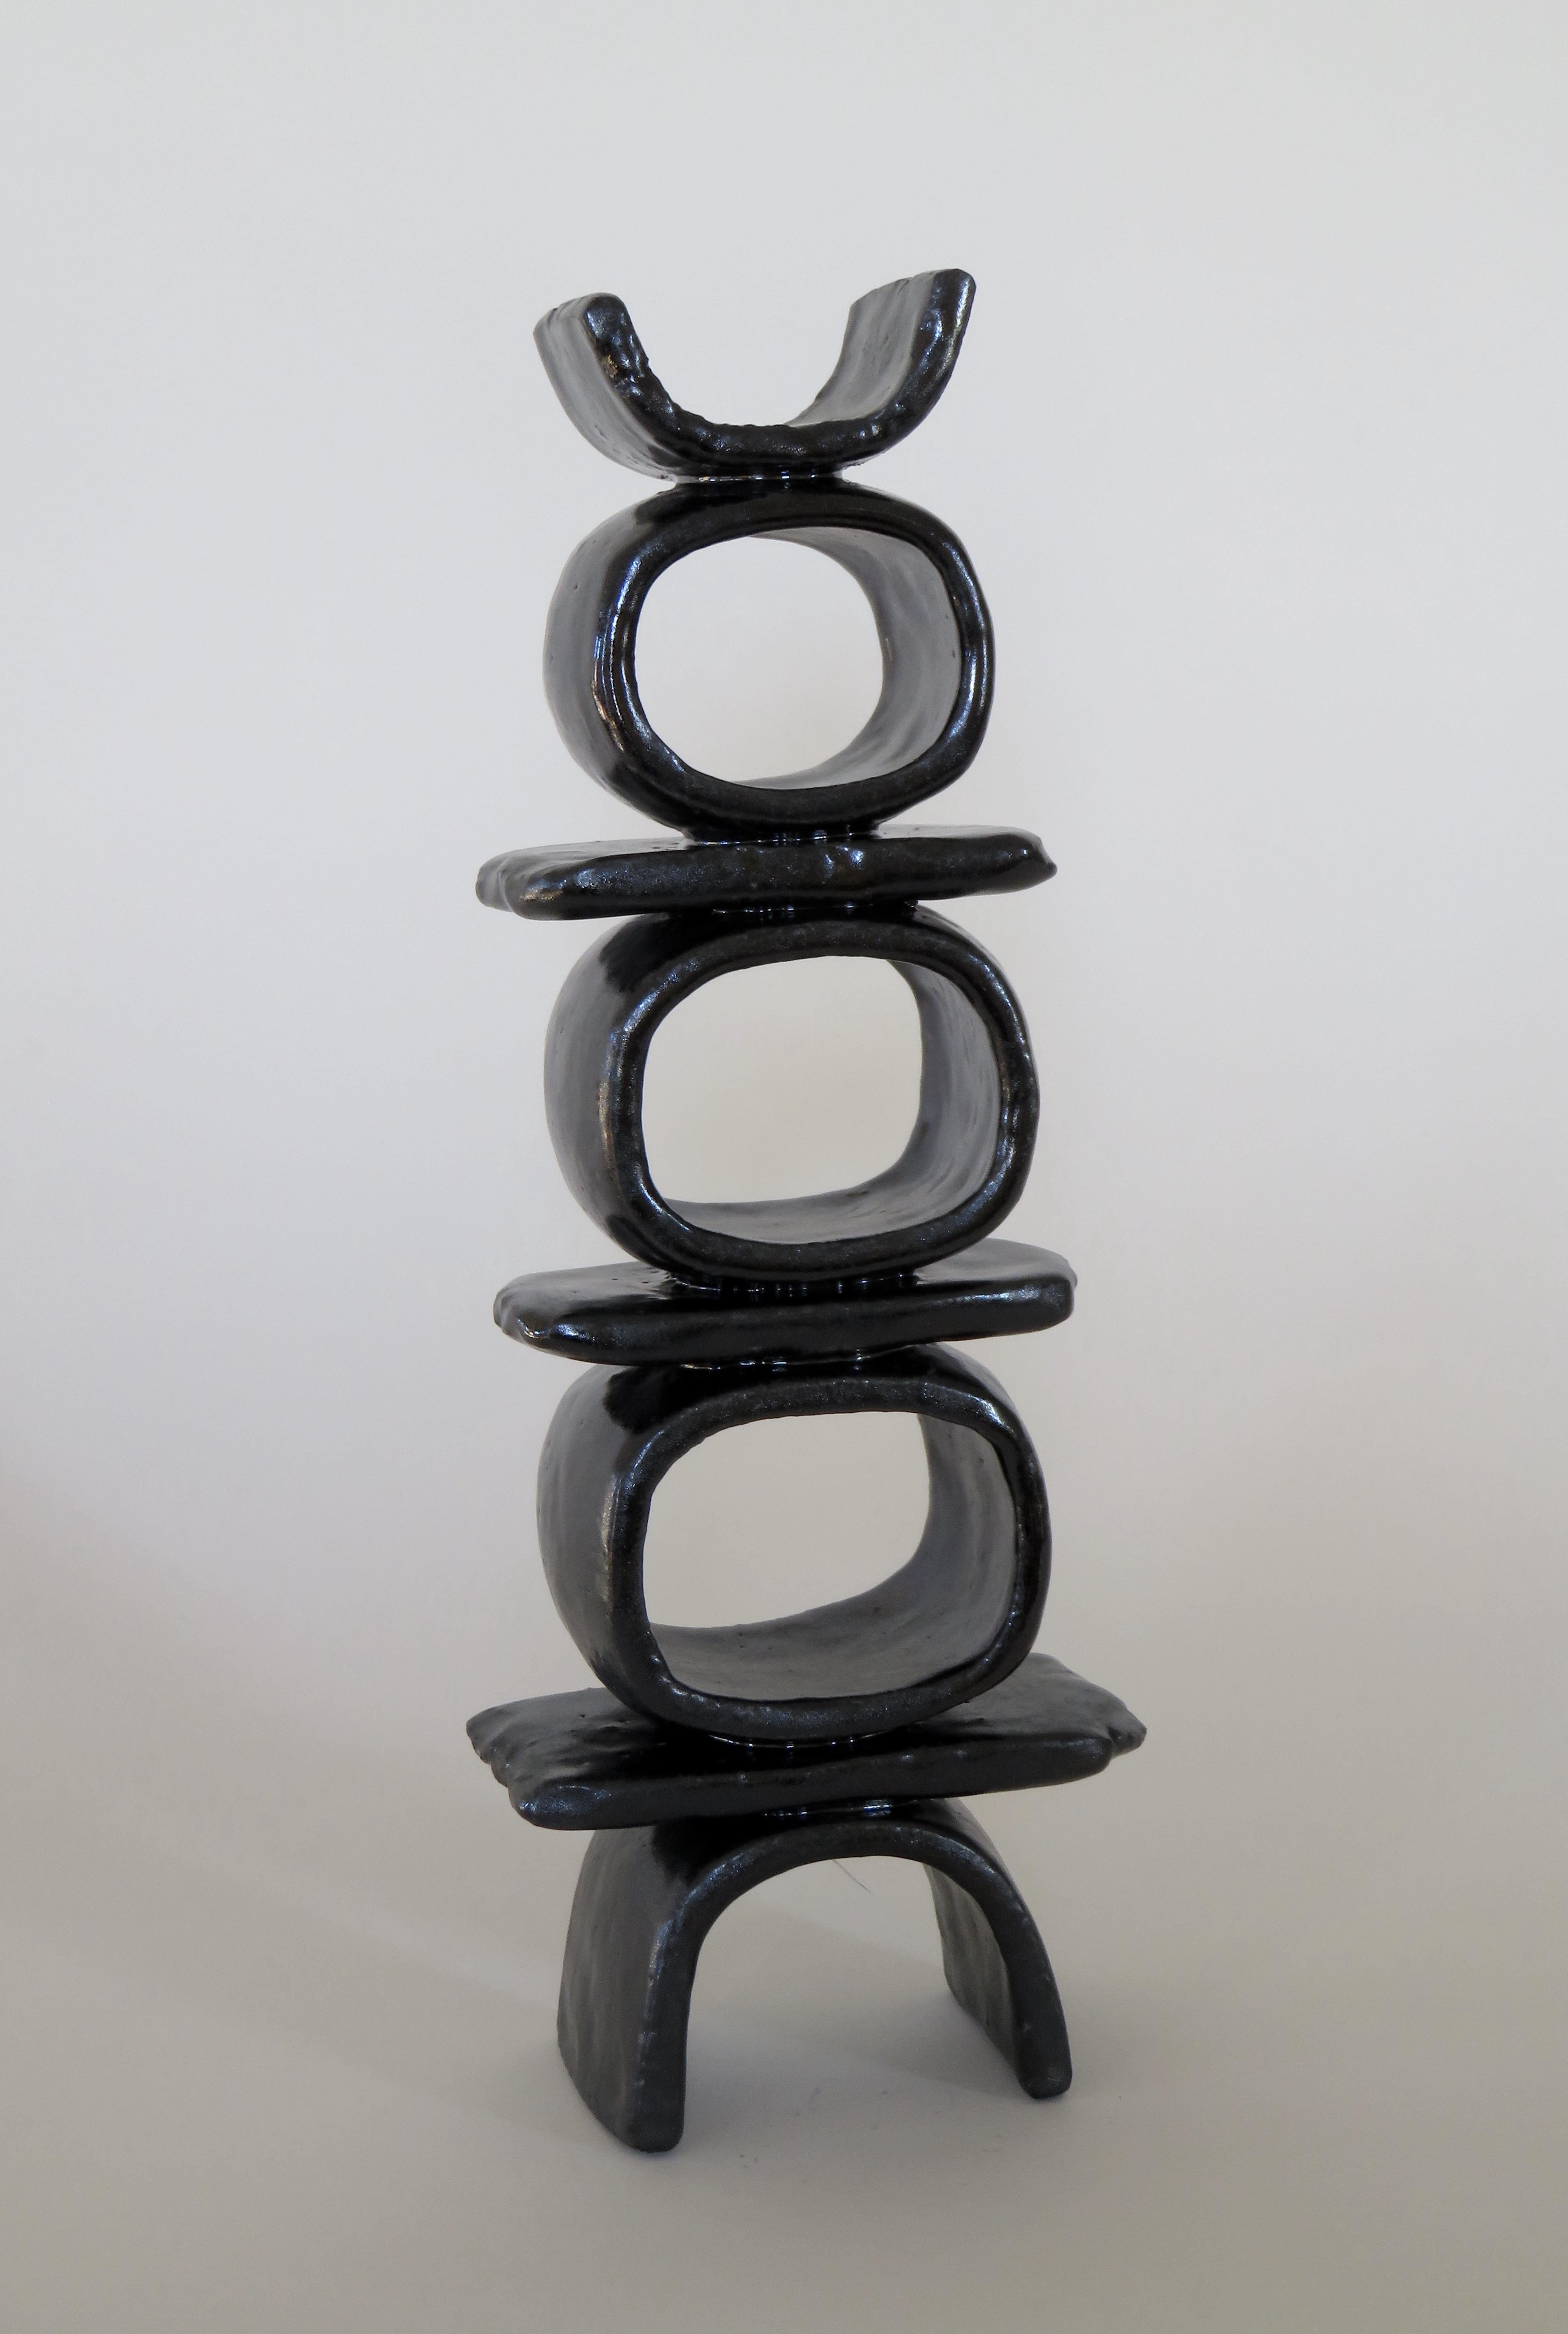 Totemic ceramic sculpture, three stacked rings and bars, on curved feet with curved topknot. Fully handmade, glazed in a glistening black. Signed with artist chop and signature.